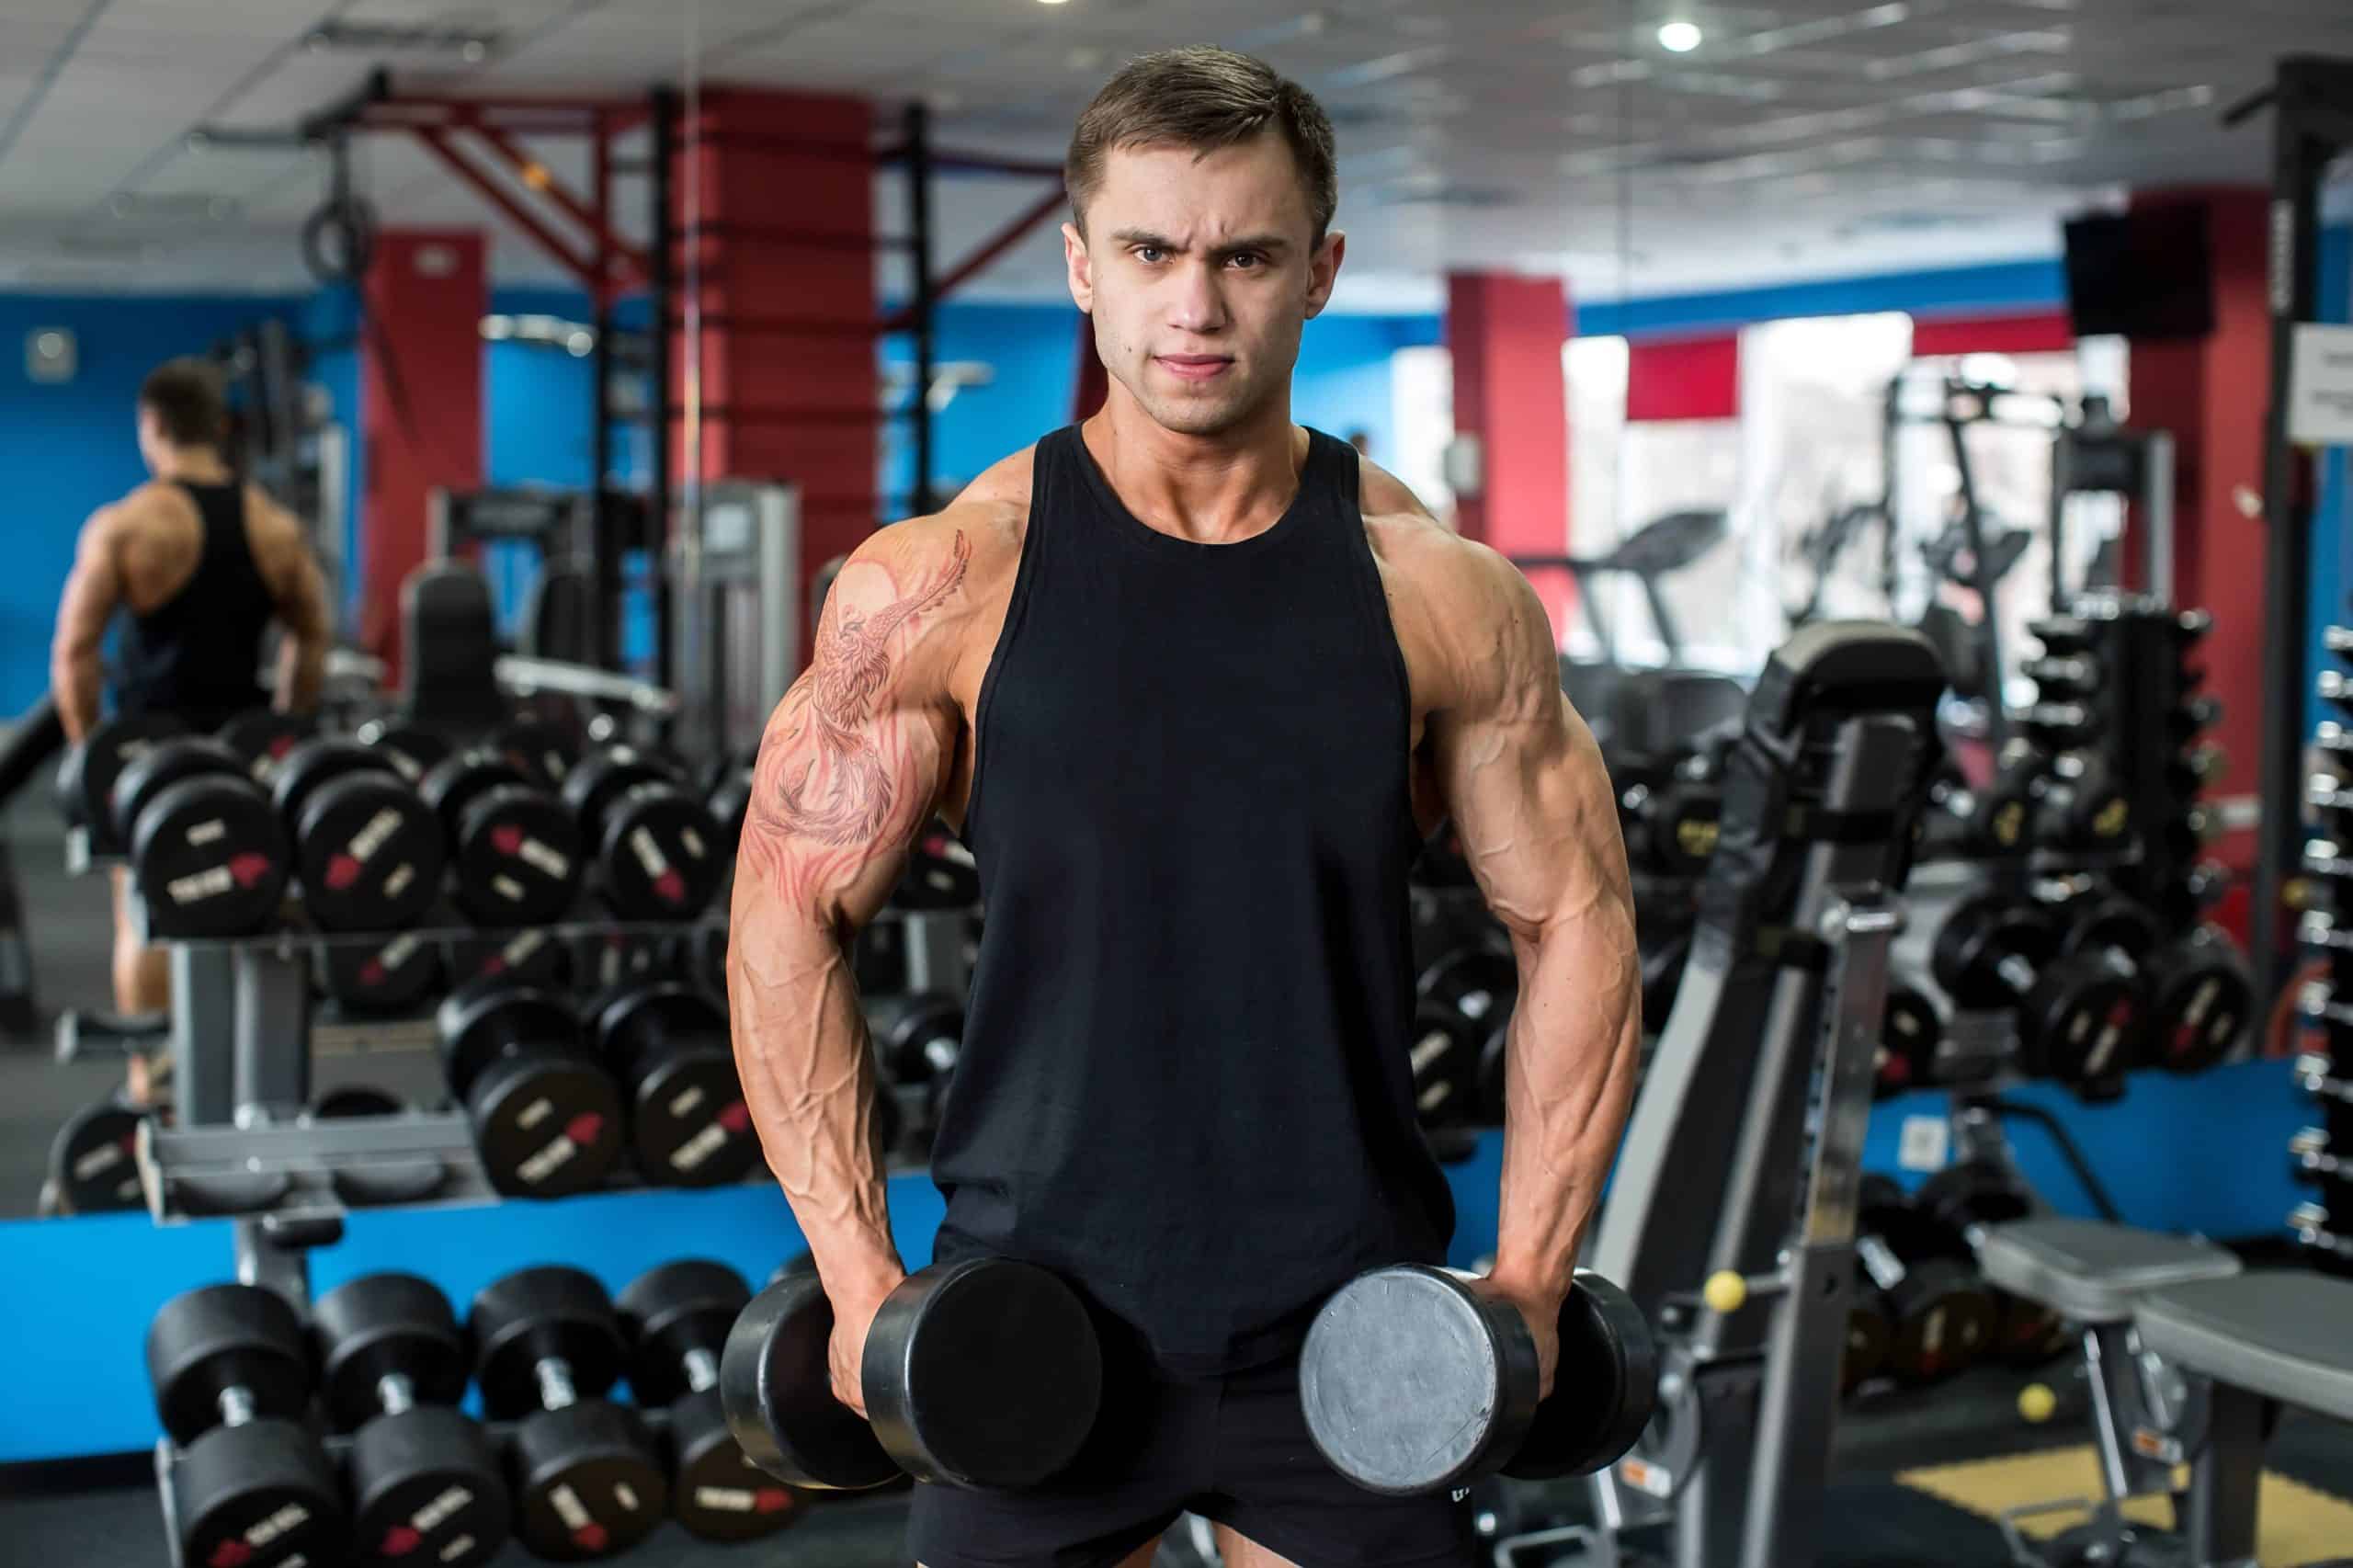 Tips for doing Shrugs workout effectively